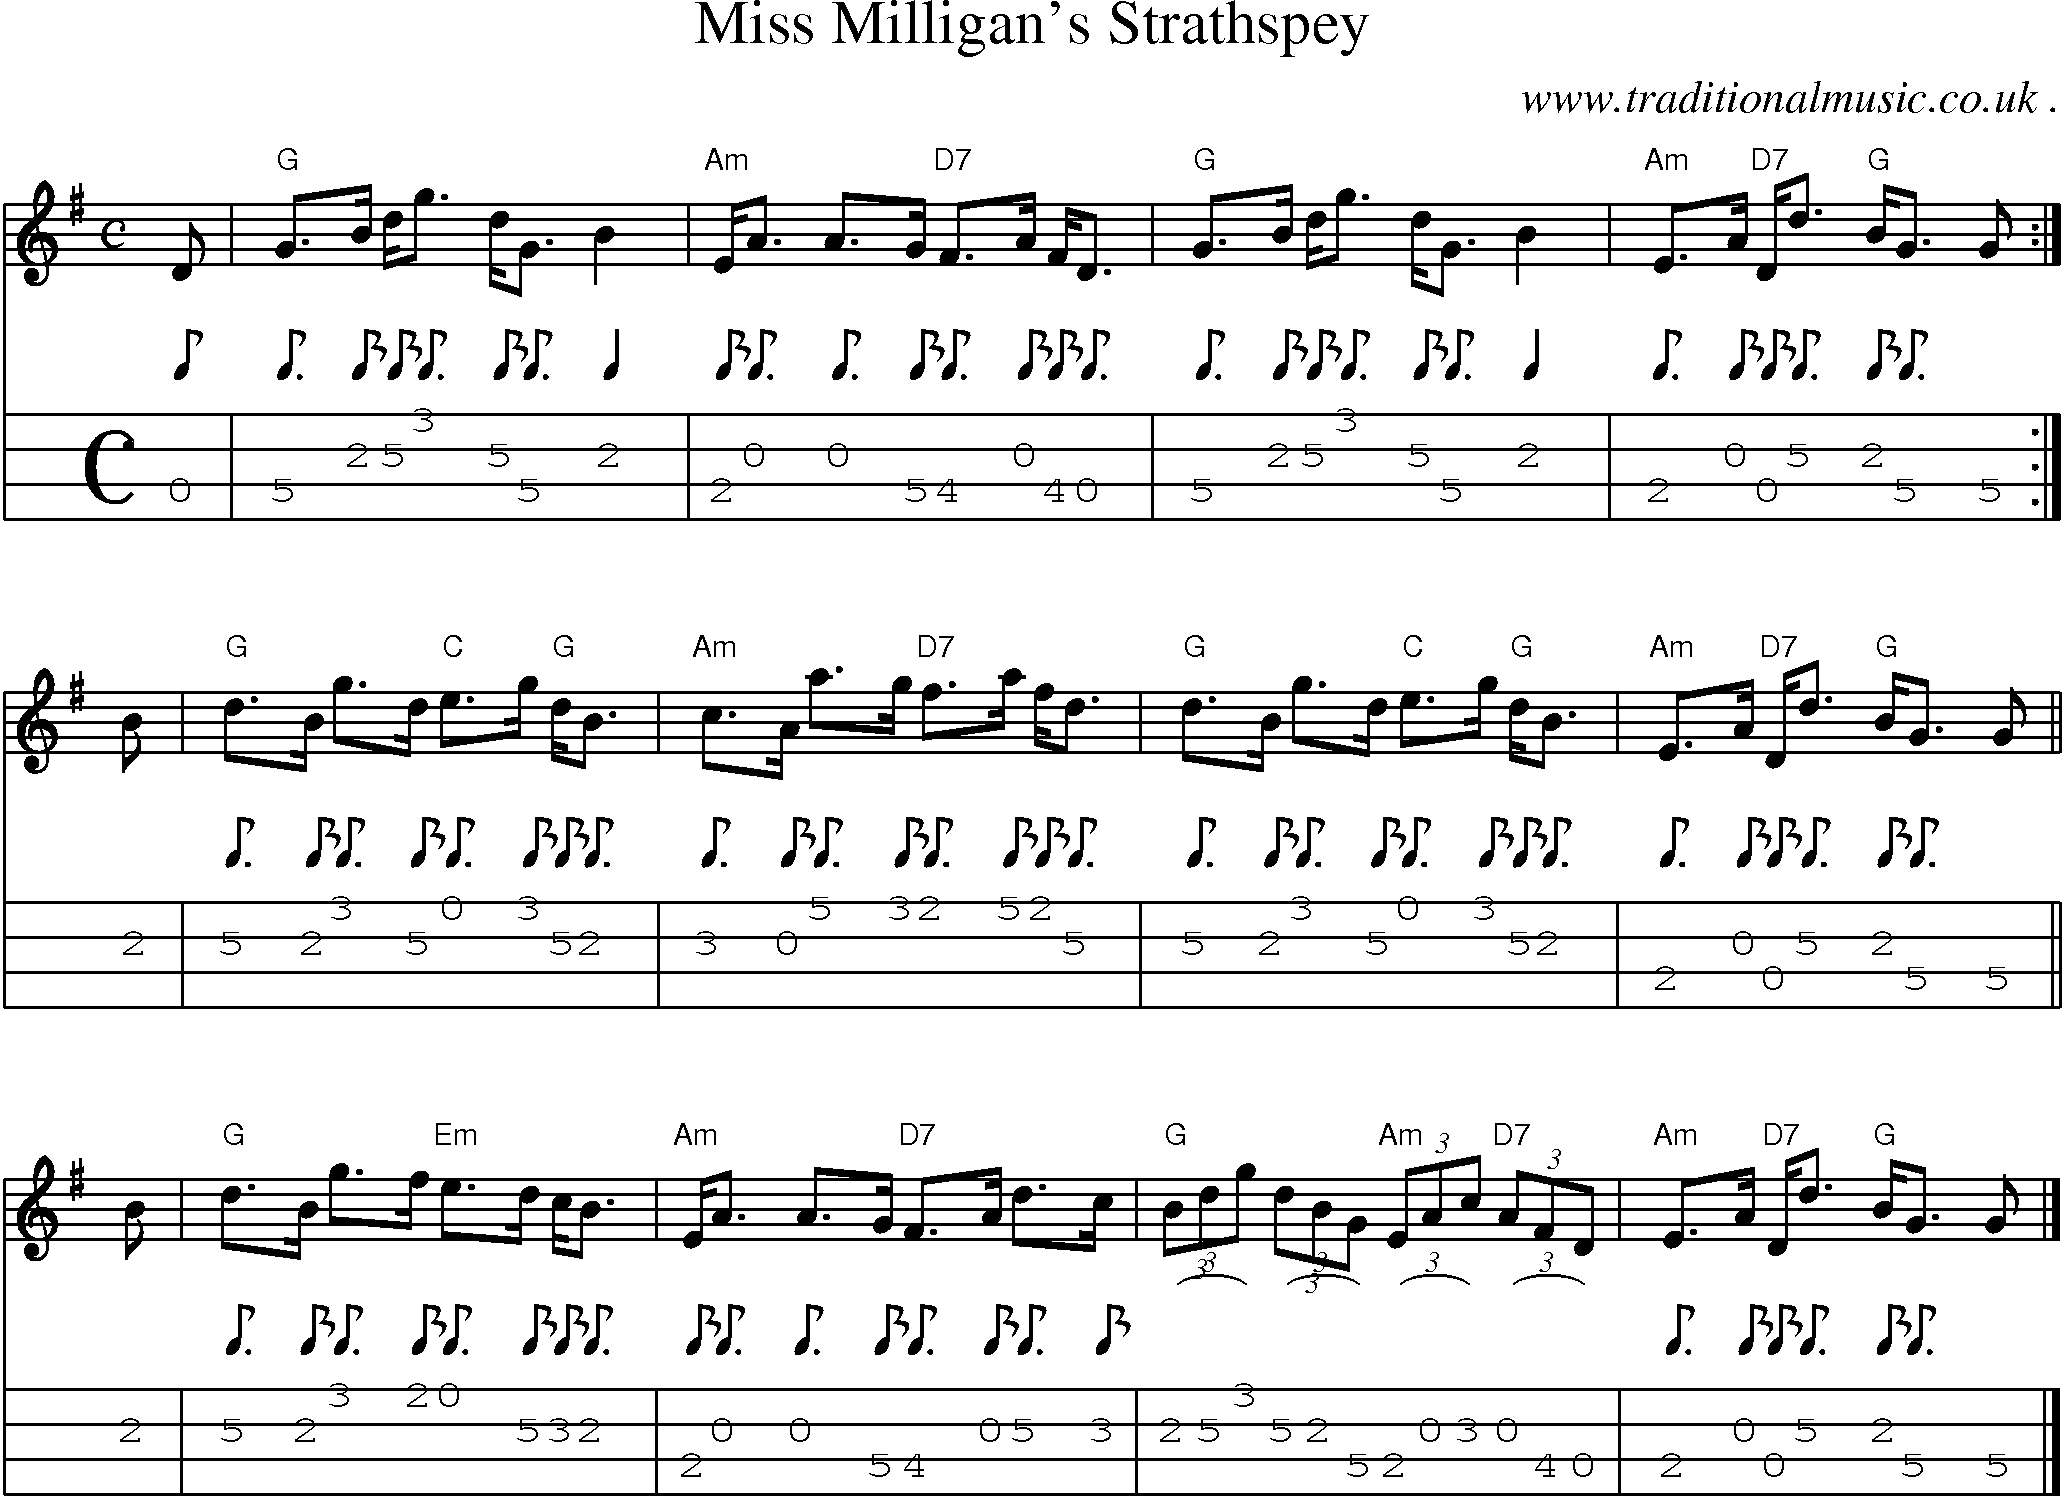 Sheet-music  score, Chords and Mandolin Tabs for Miss Milligans Strathspey